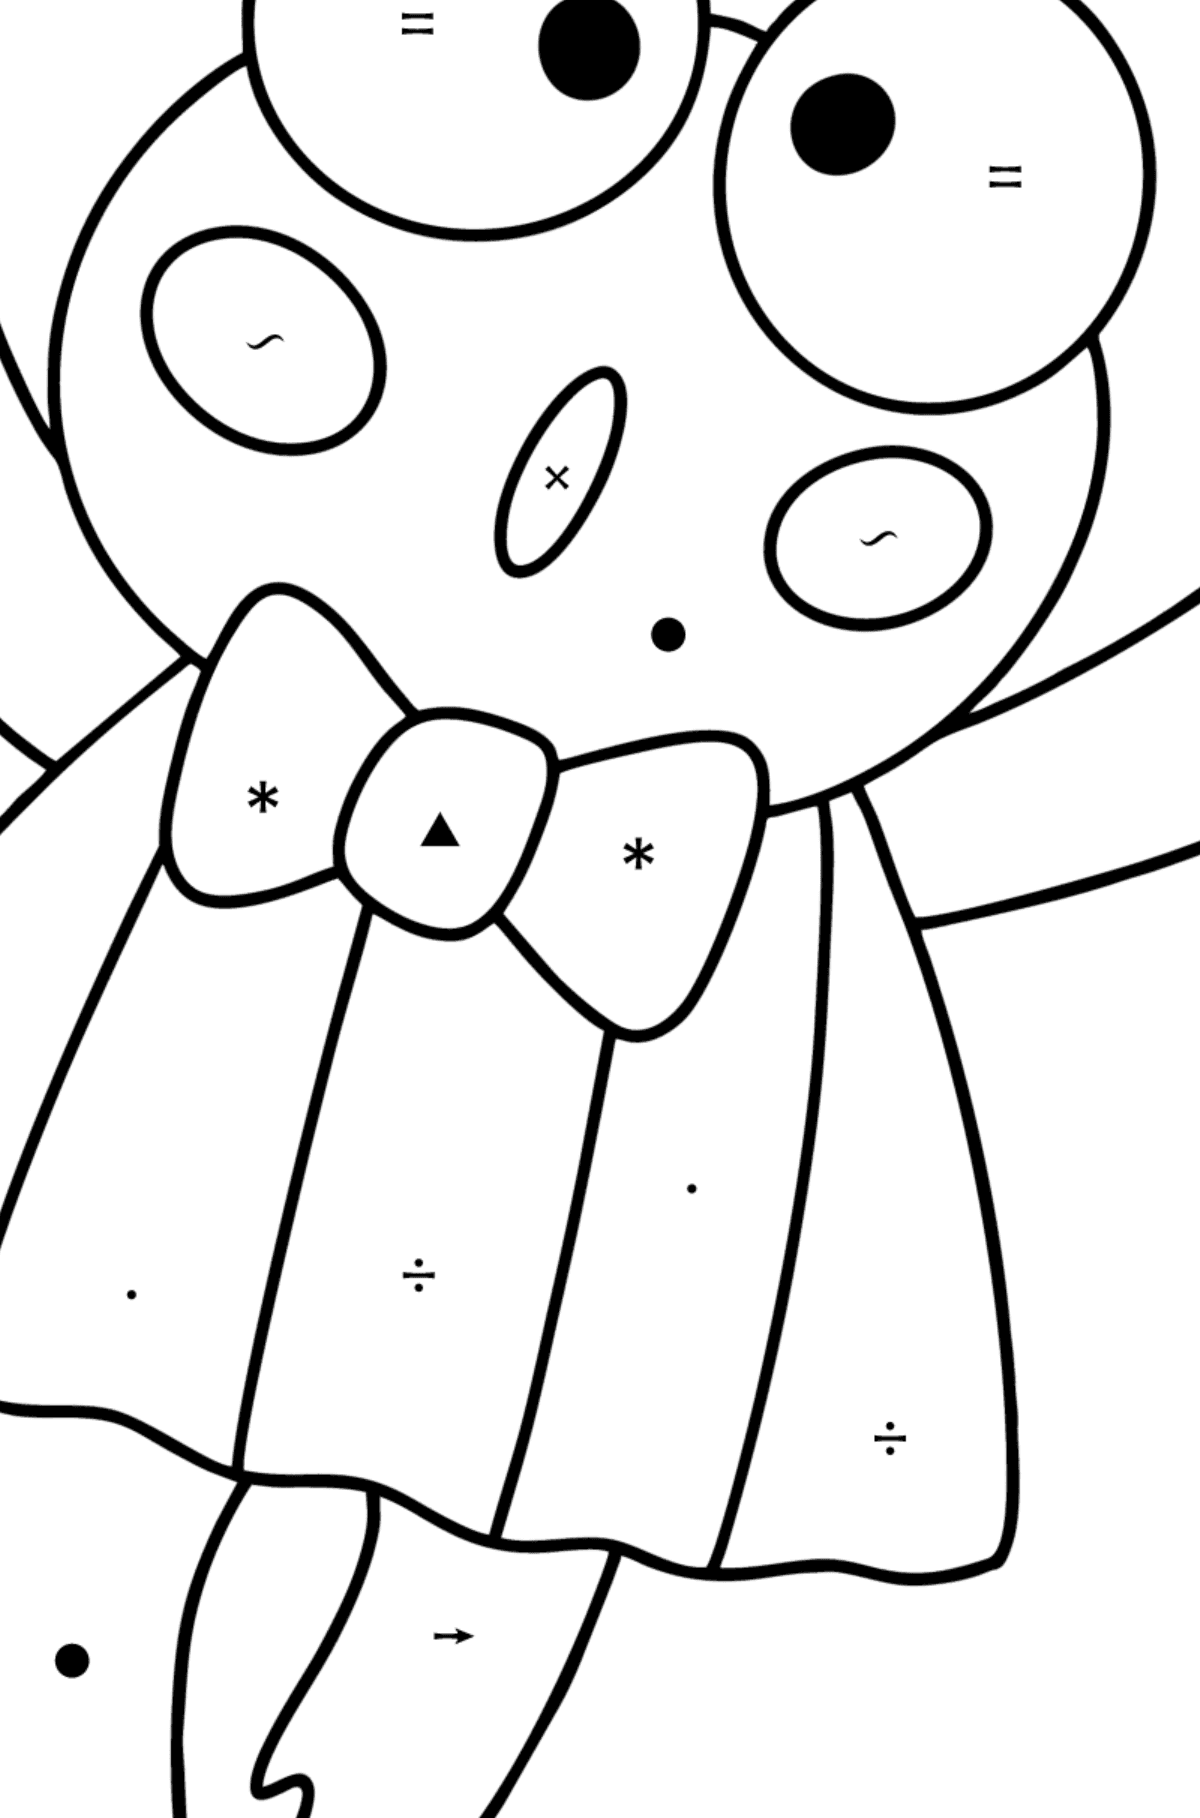 Hello Kitty Keroppi coloring page - Coloring by Symbols for Kids